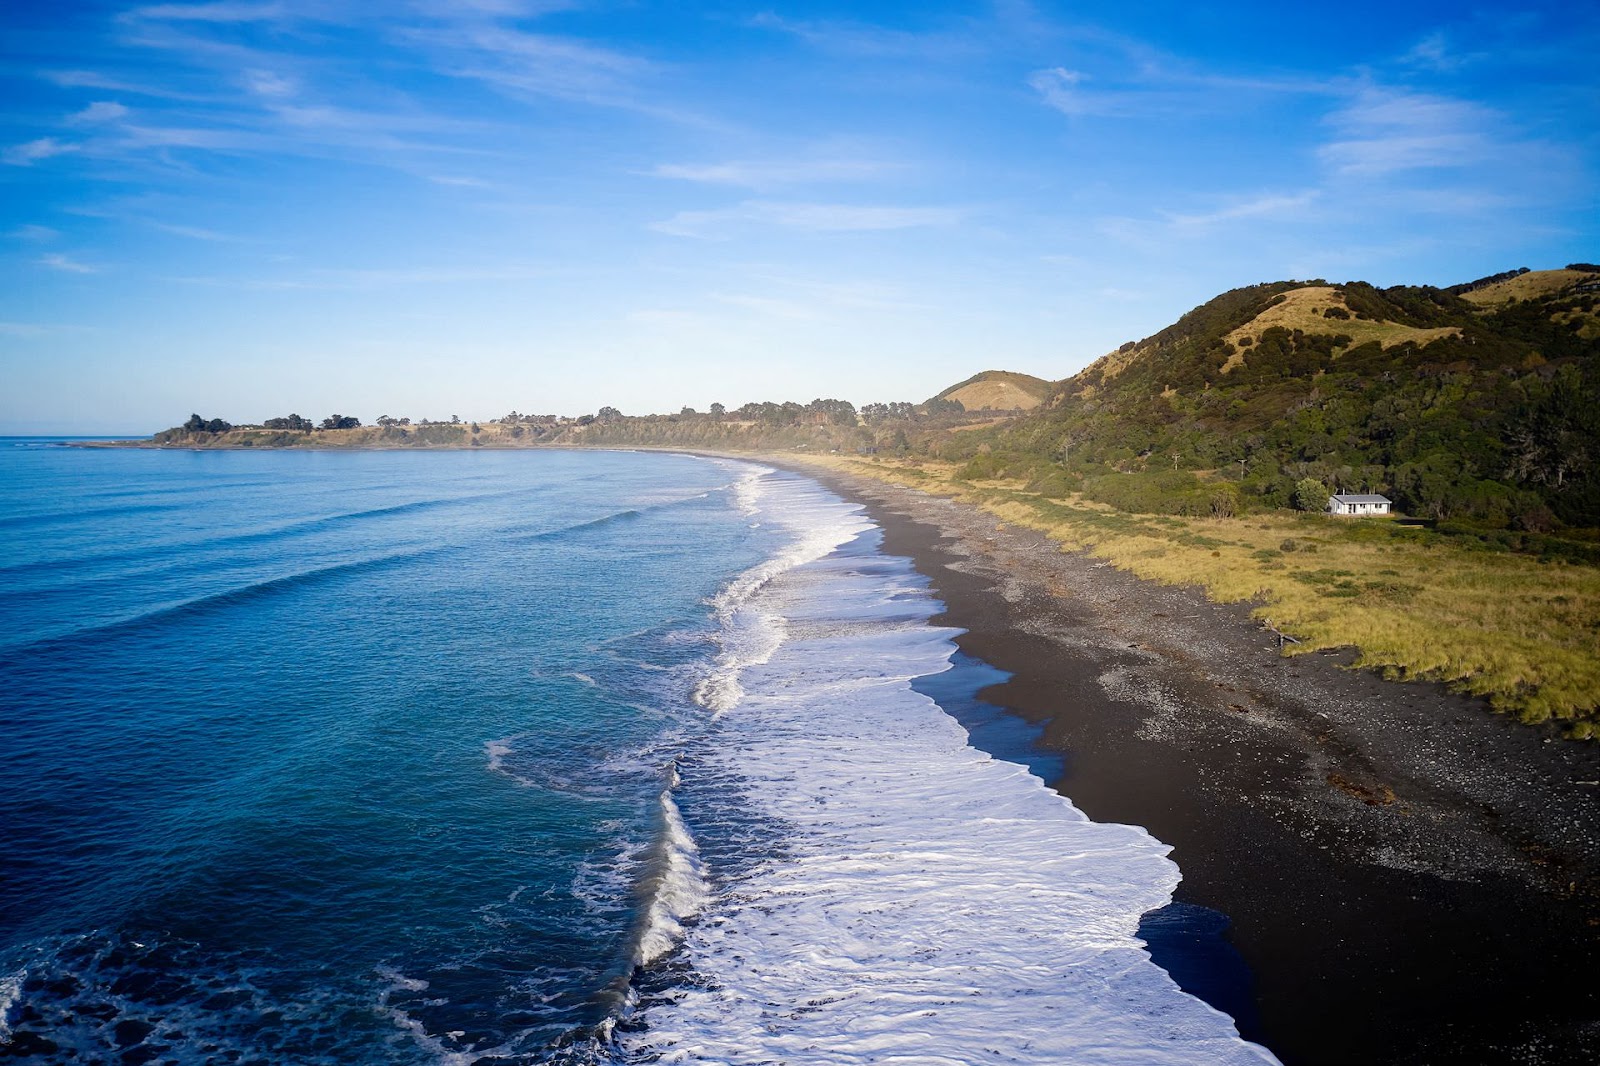 Photo of Half Moon Bay Beach with brown pebble surface